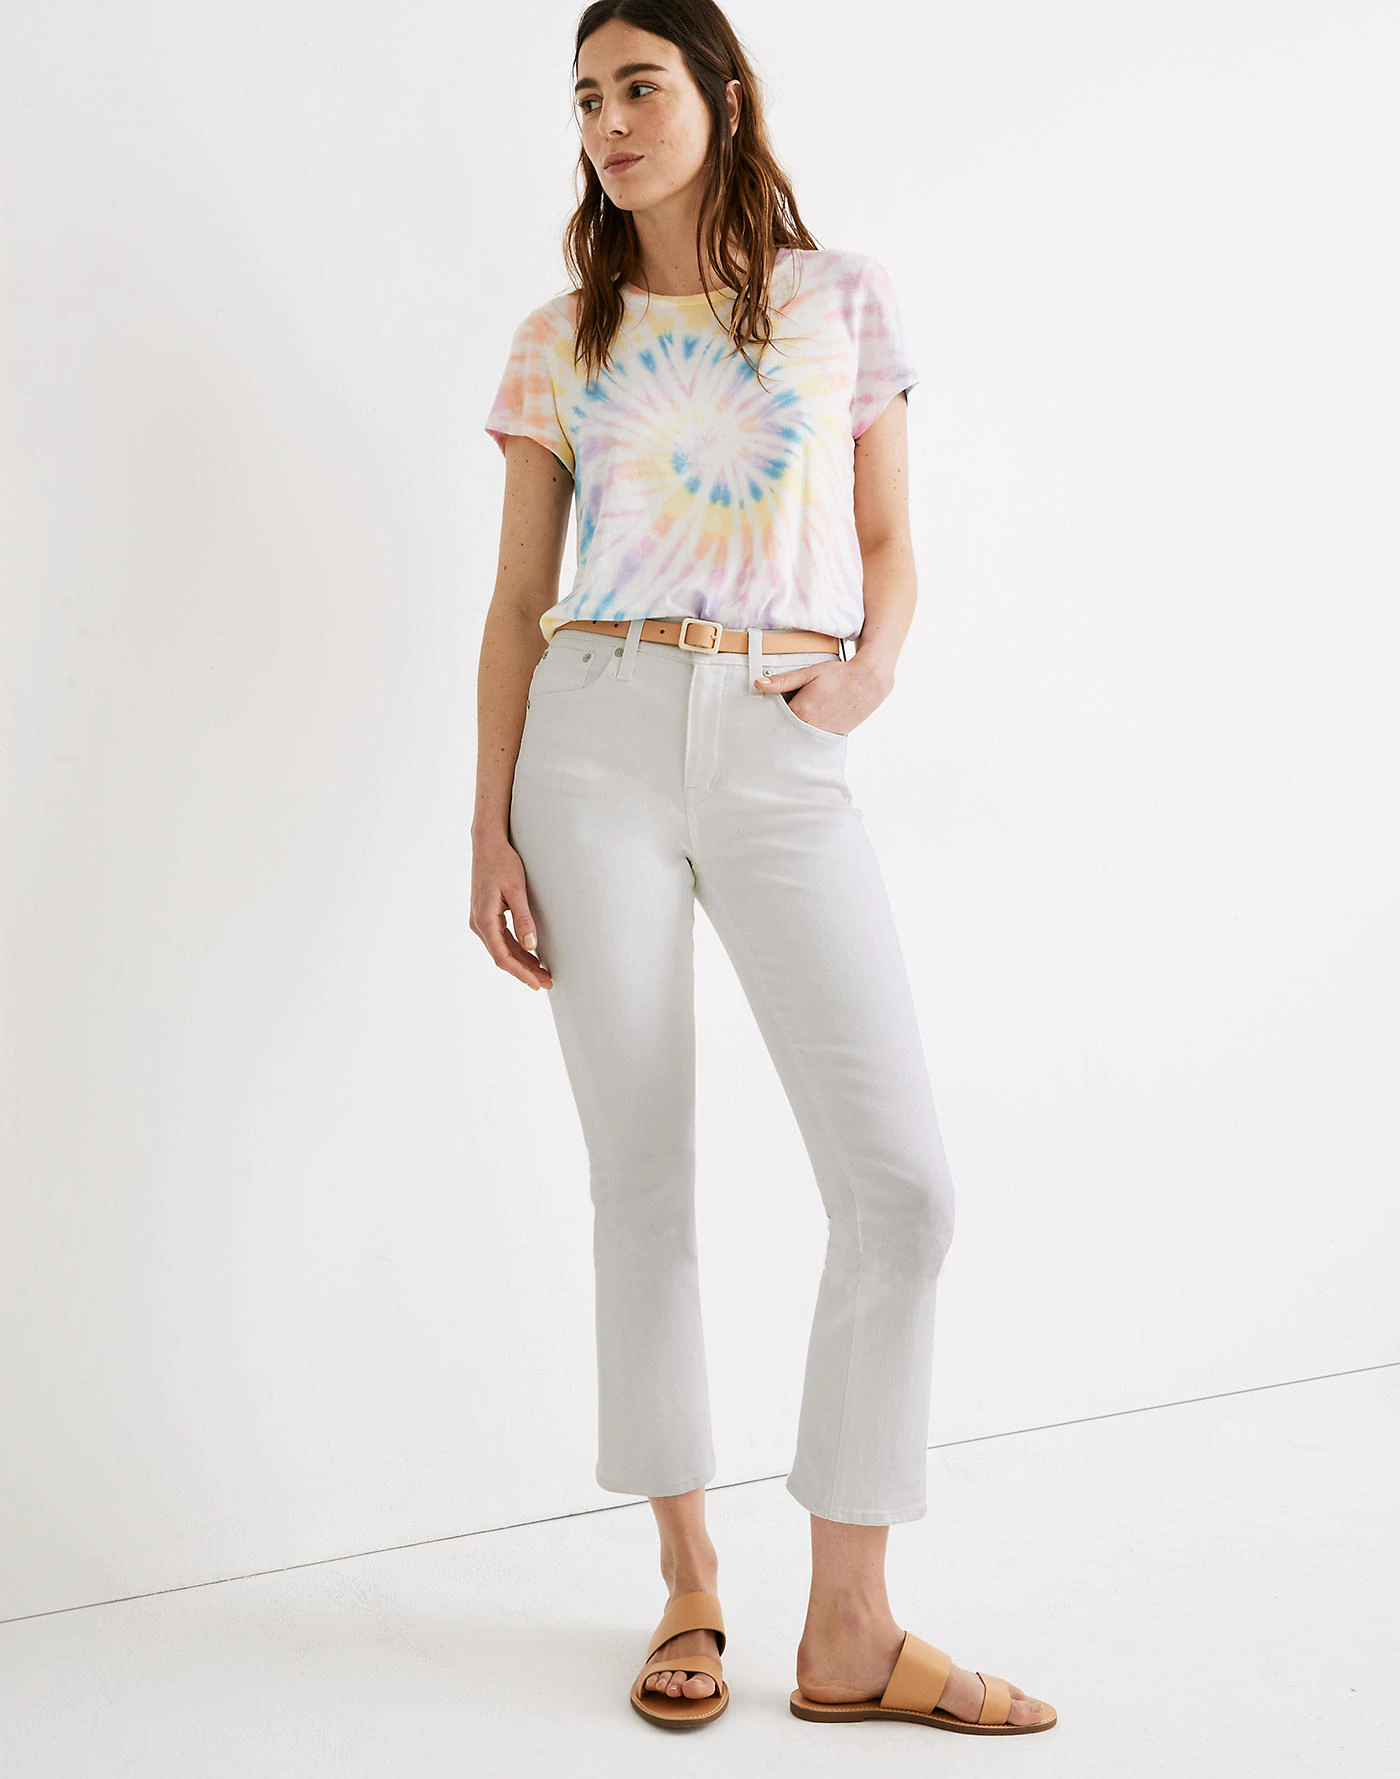 madewell retro crop bootcut jeans